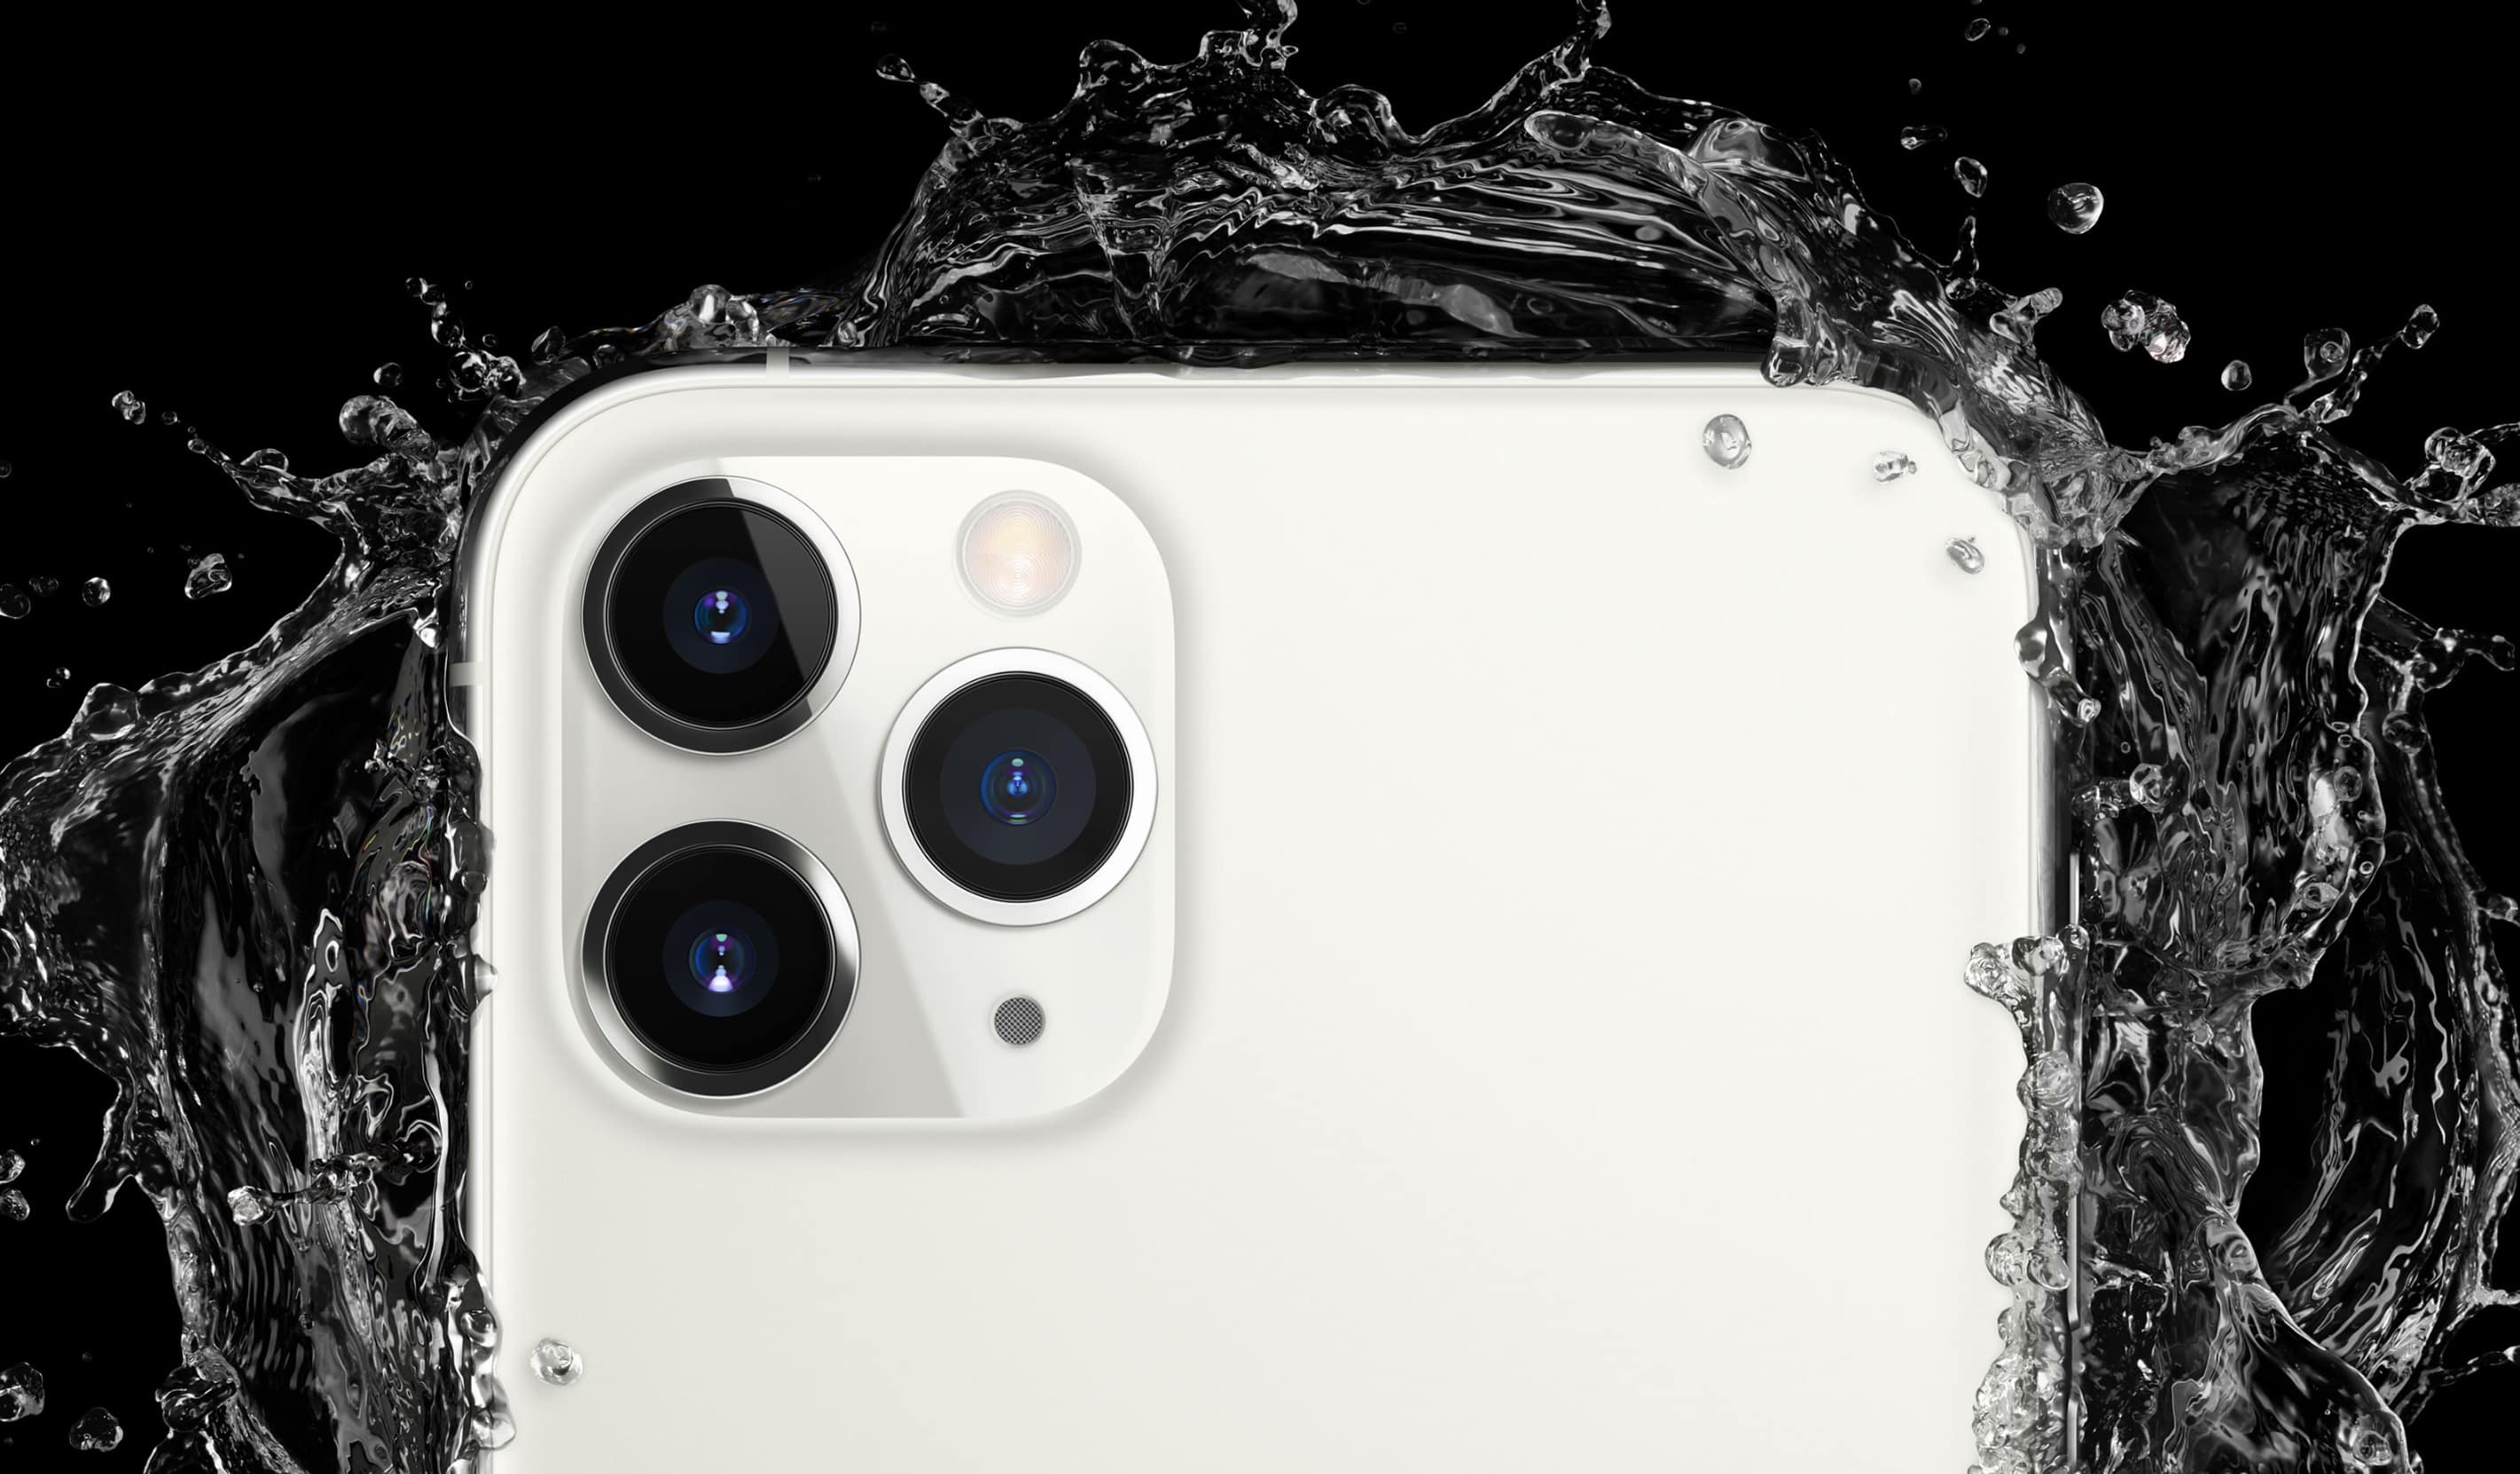 The iPhone 11 Pro's new triple-lens camera is sure to make a splash